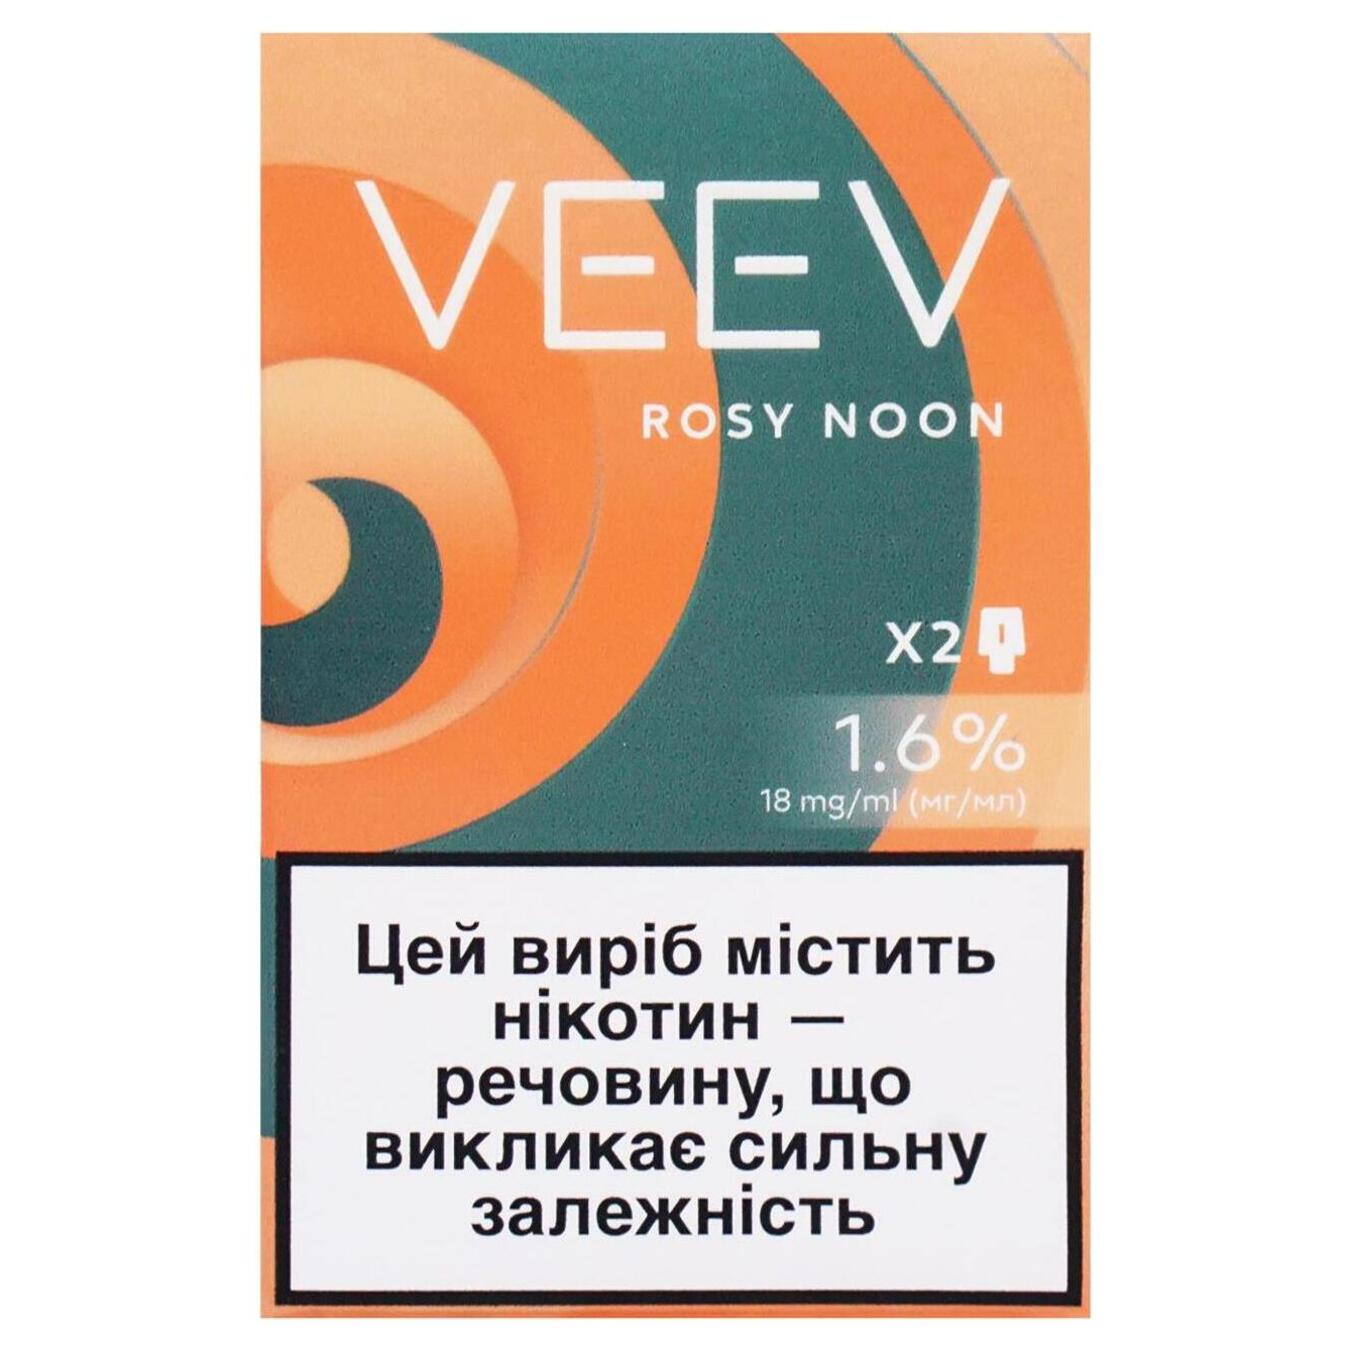 Cartridge VEEV Rosy Noon 1.6% (the price is indicated without excise duty)